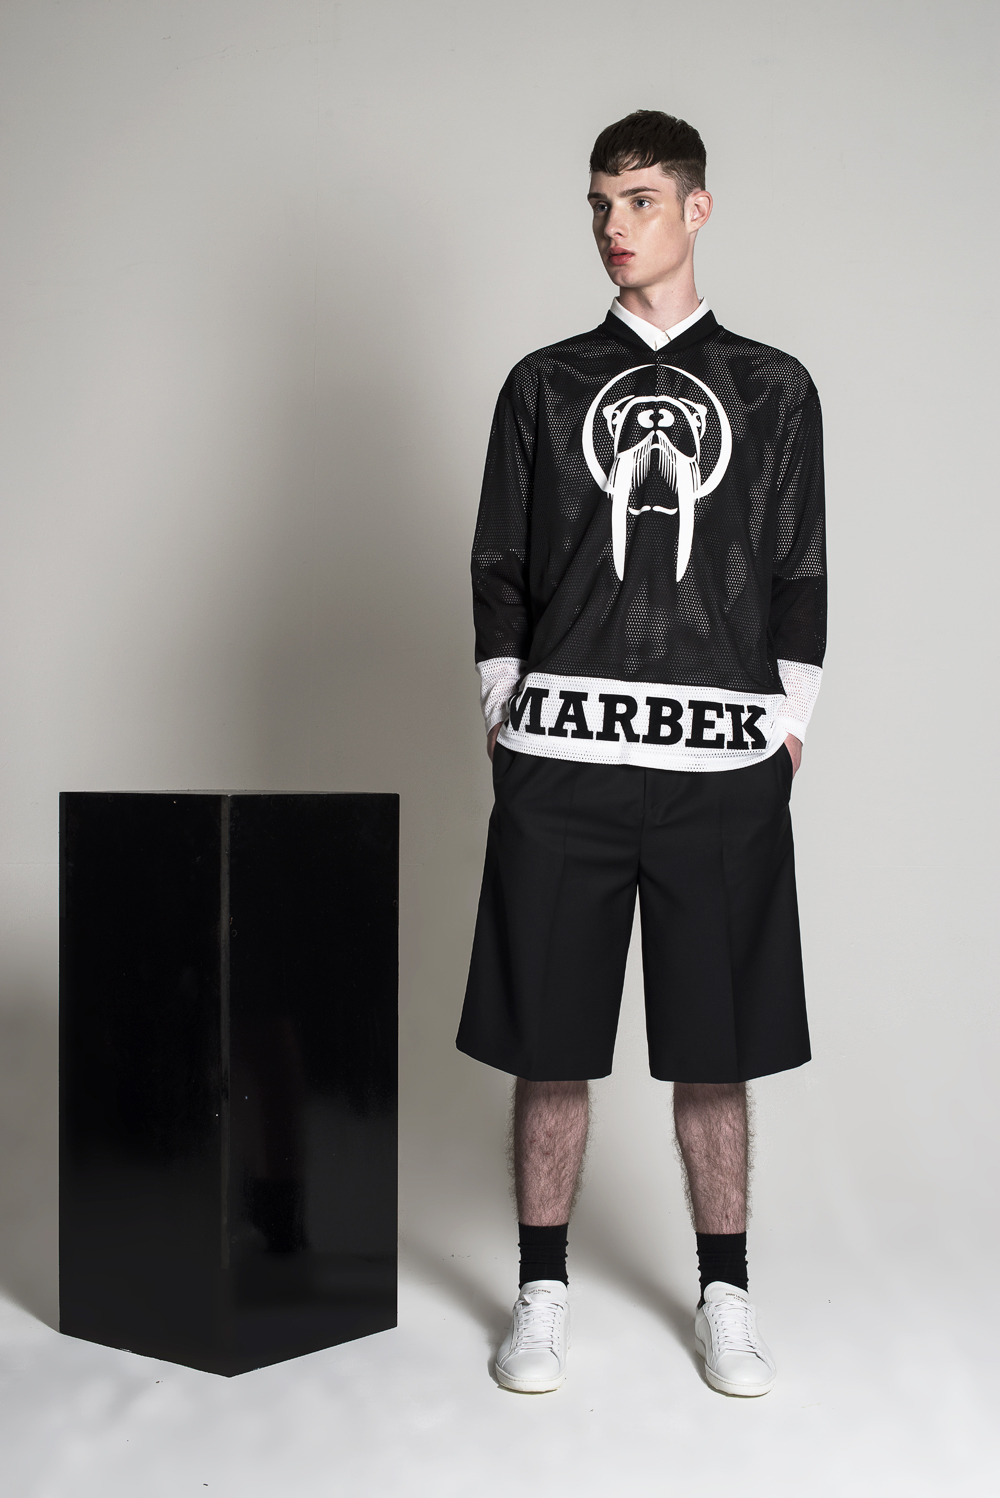 Marbek Launches Capsule Collection